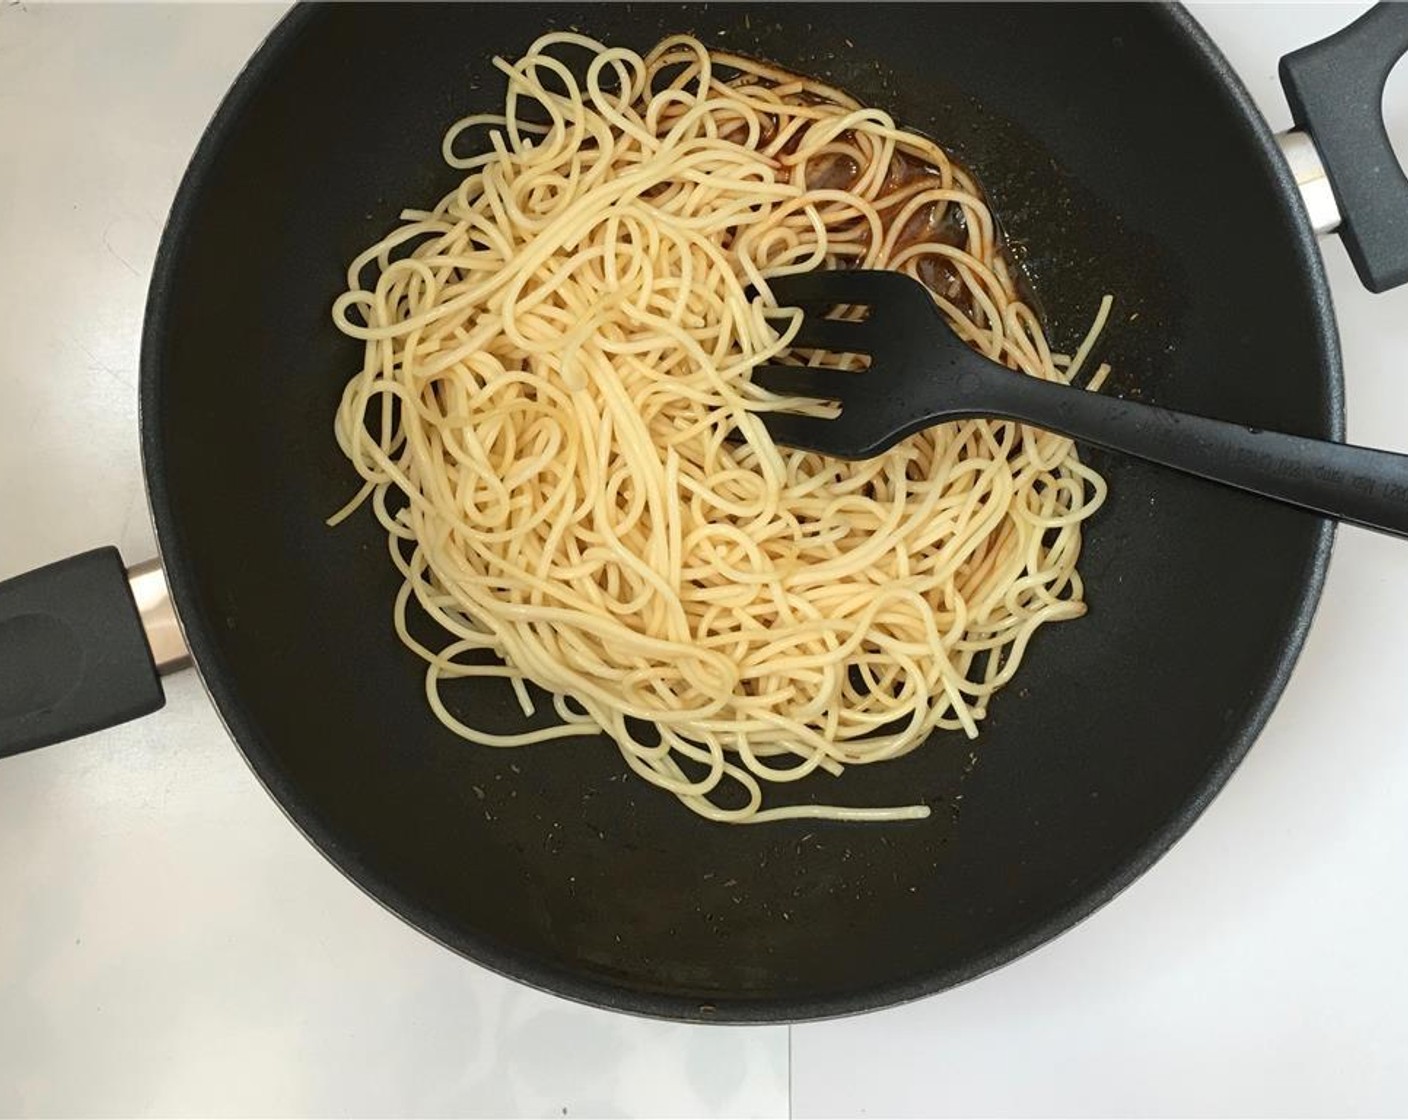 step 7 Place the wok over medium heat. Once the oil is warm and the tomato paste starts to fry, add 1/3 cup (80 mL) of water (or pasta cooking liquid). Stir and let this mixture reduce by half. Then add the cooked pasta.